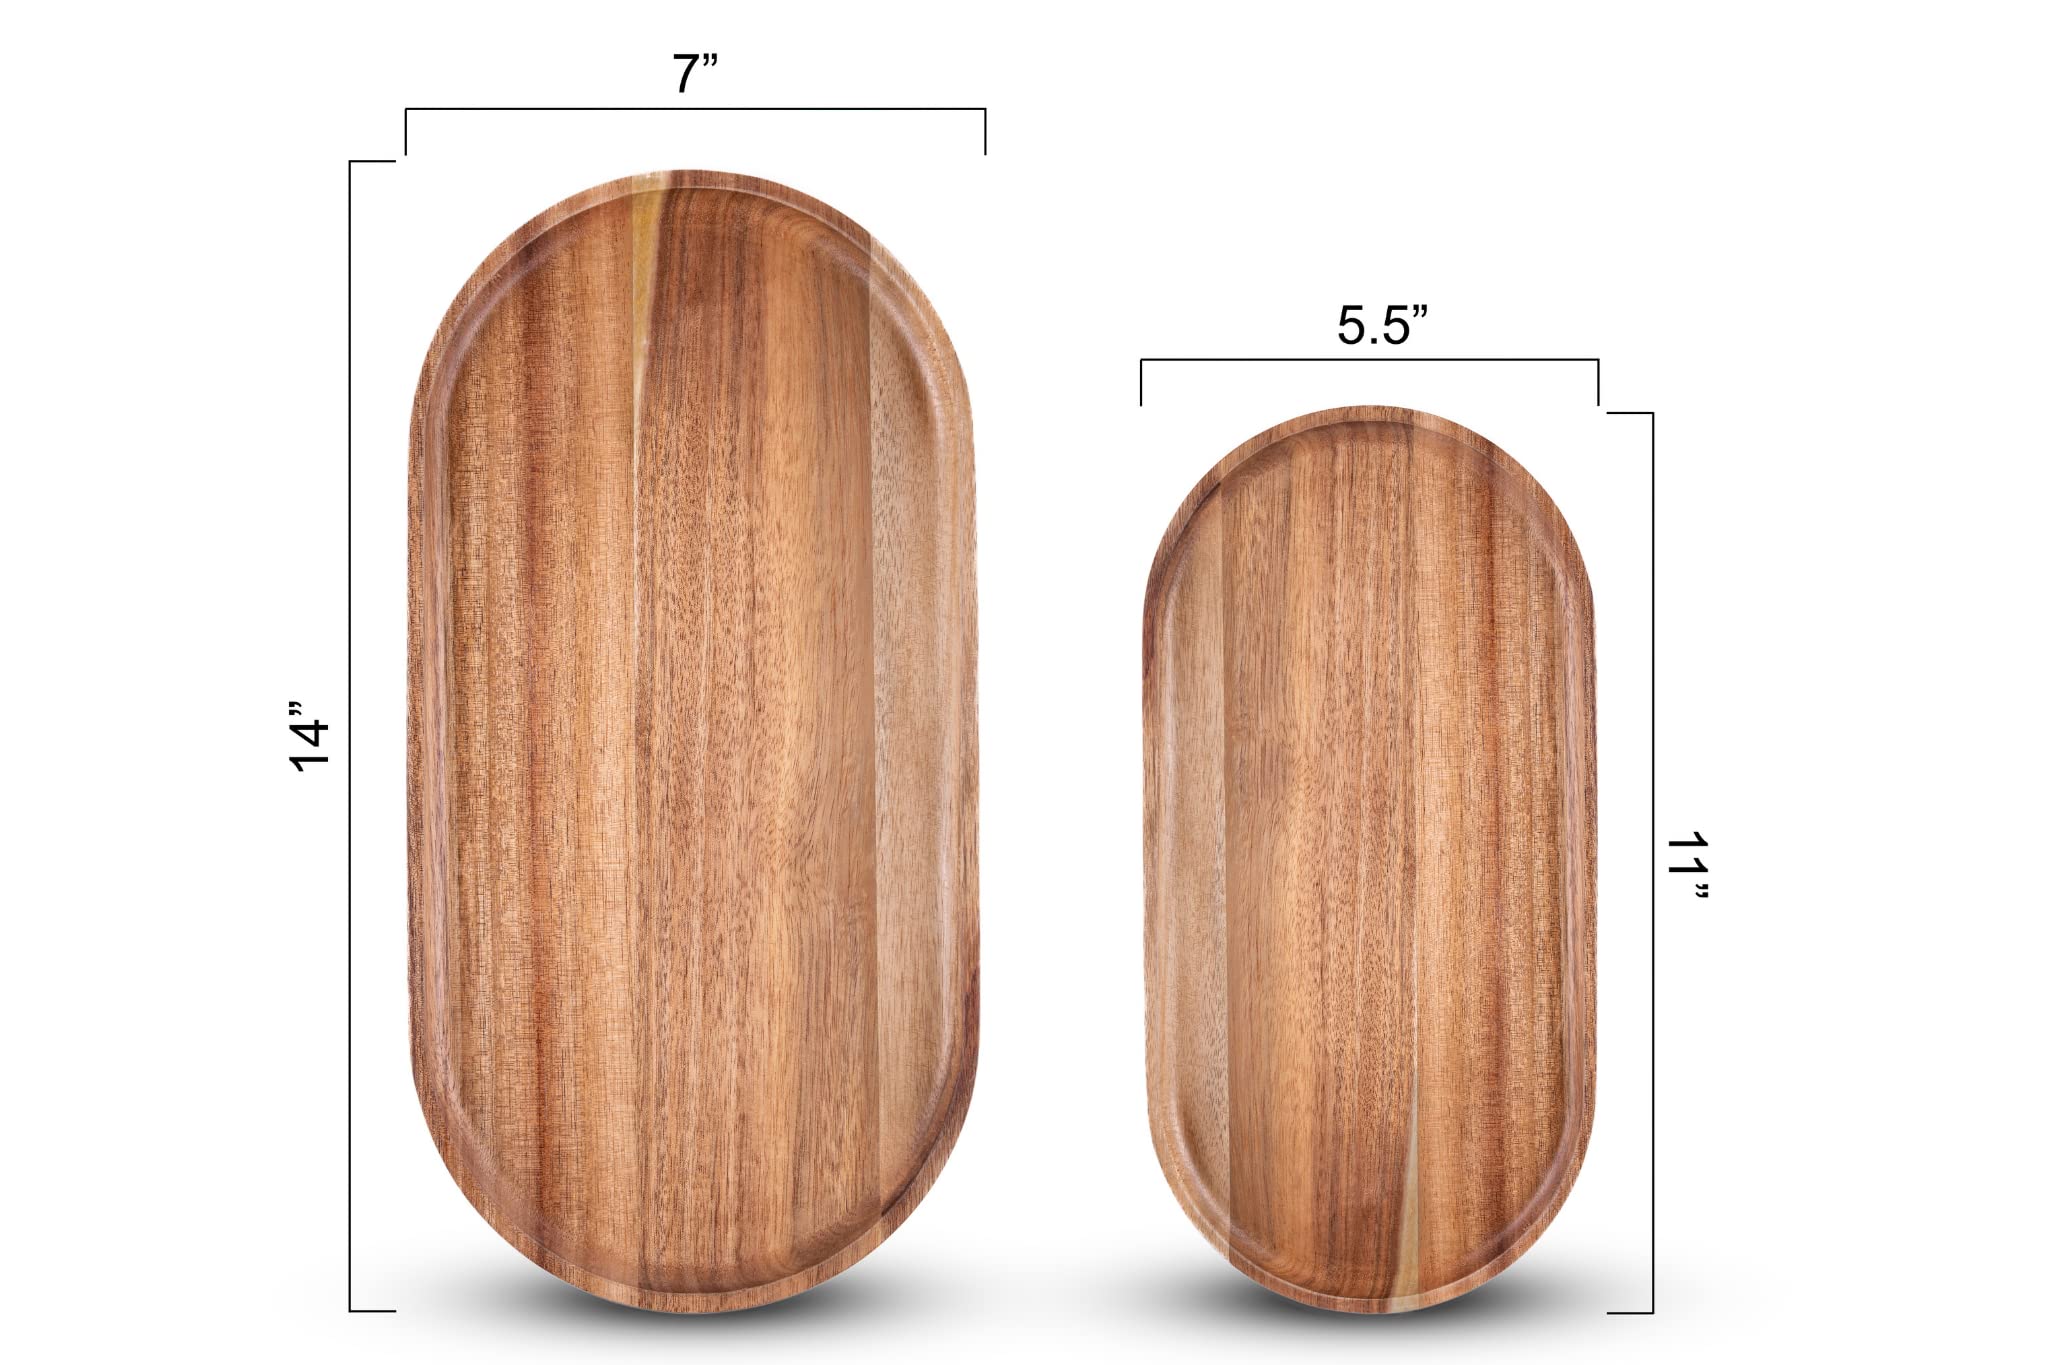 SPEShh Acacia Wooden Serving Trays Set of 2 - Rectangular Oval Shaped Wood Plates for Charcuterie Cheese Bread Fruit Vegetable Dip Sushi - Rustic Serving Platter Shallow Dishes -14x7 & 11x5.5 in.